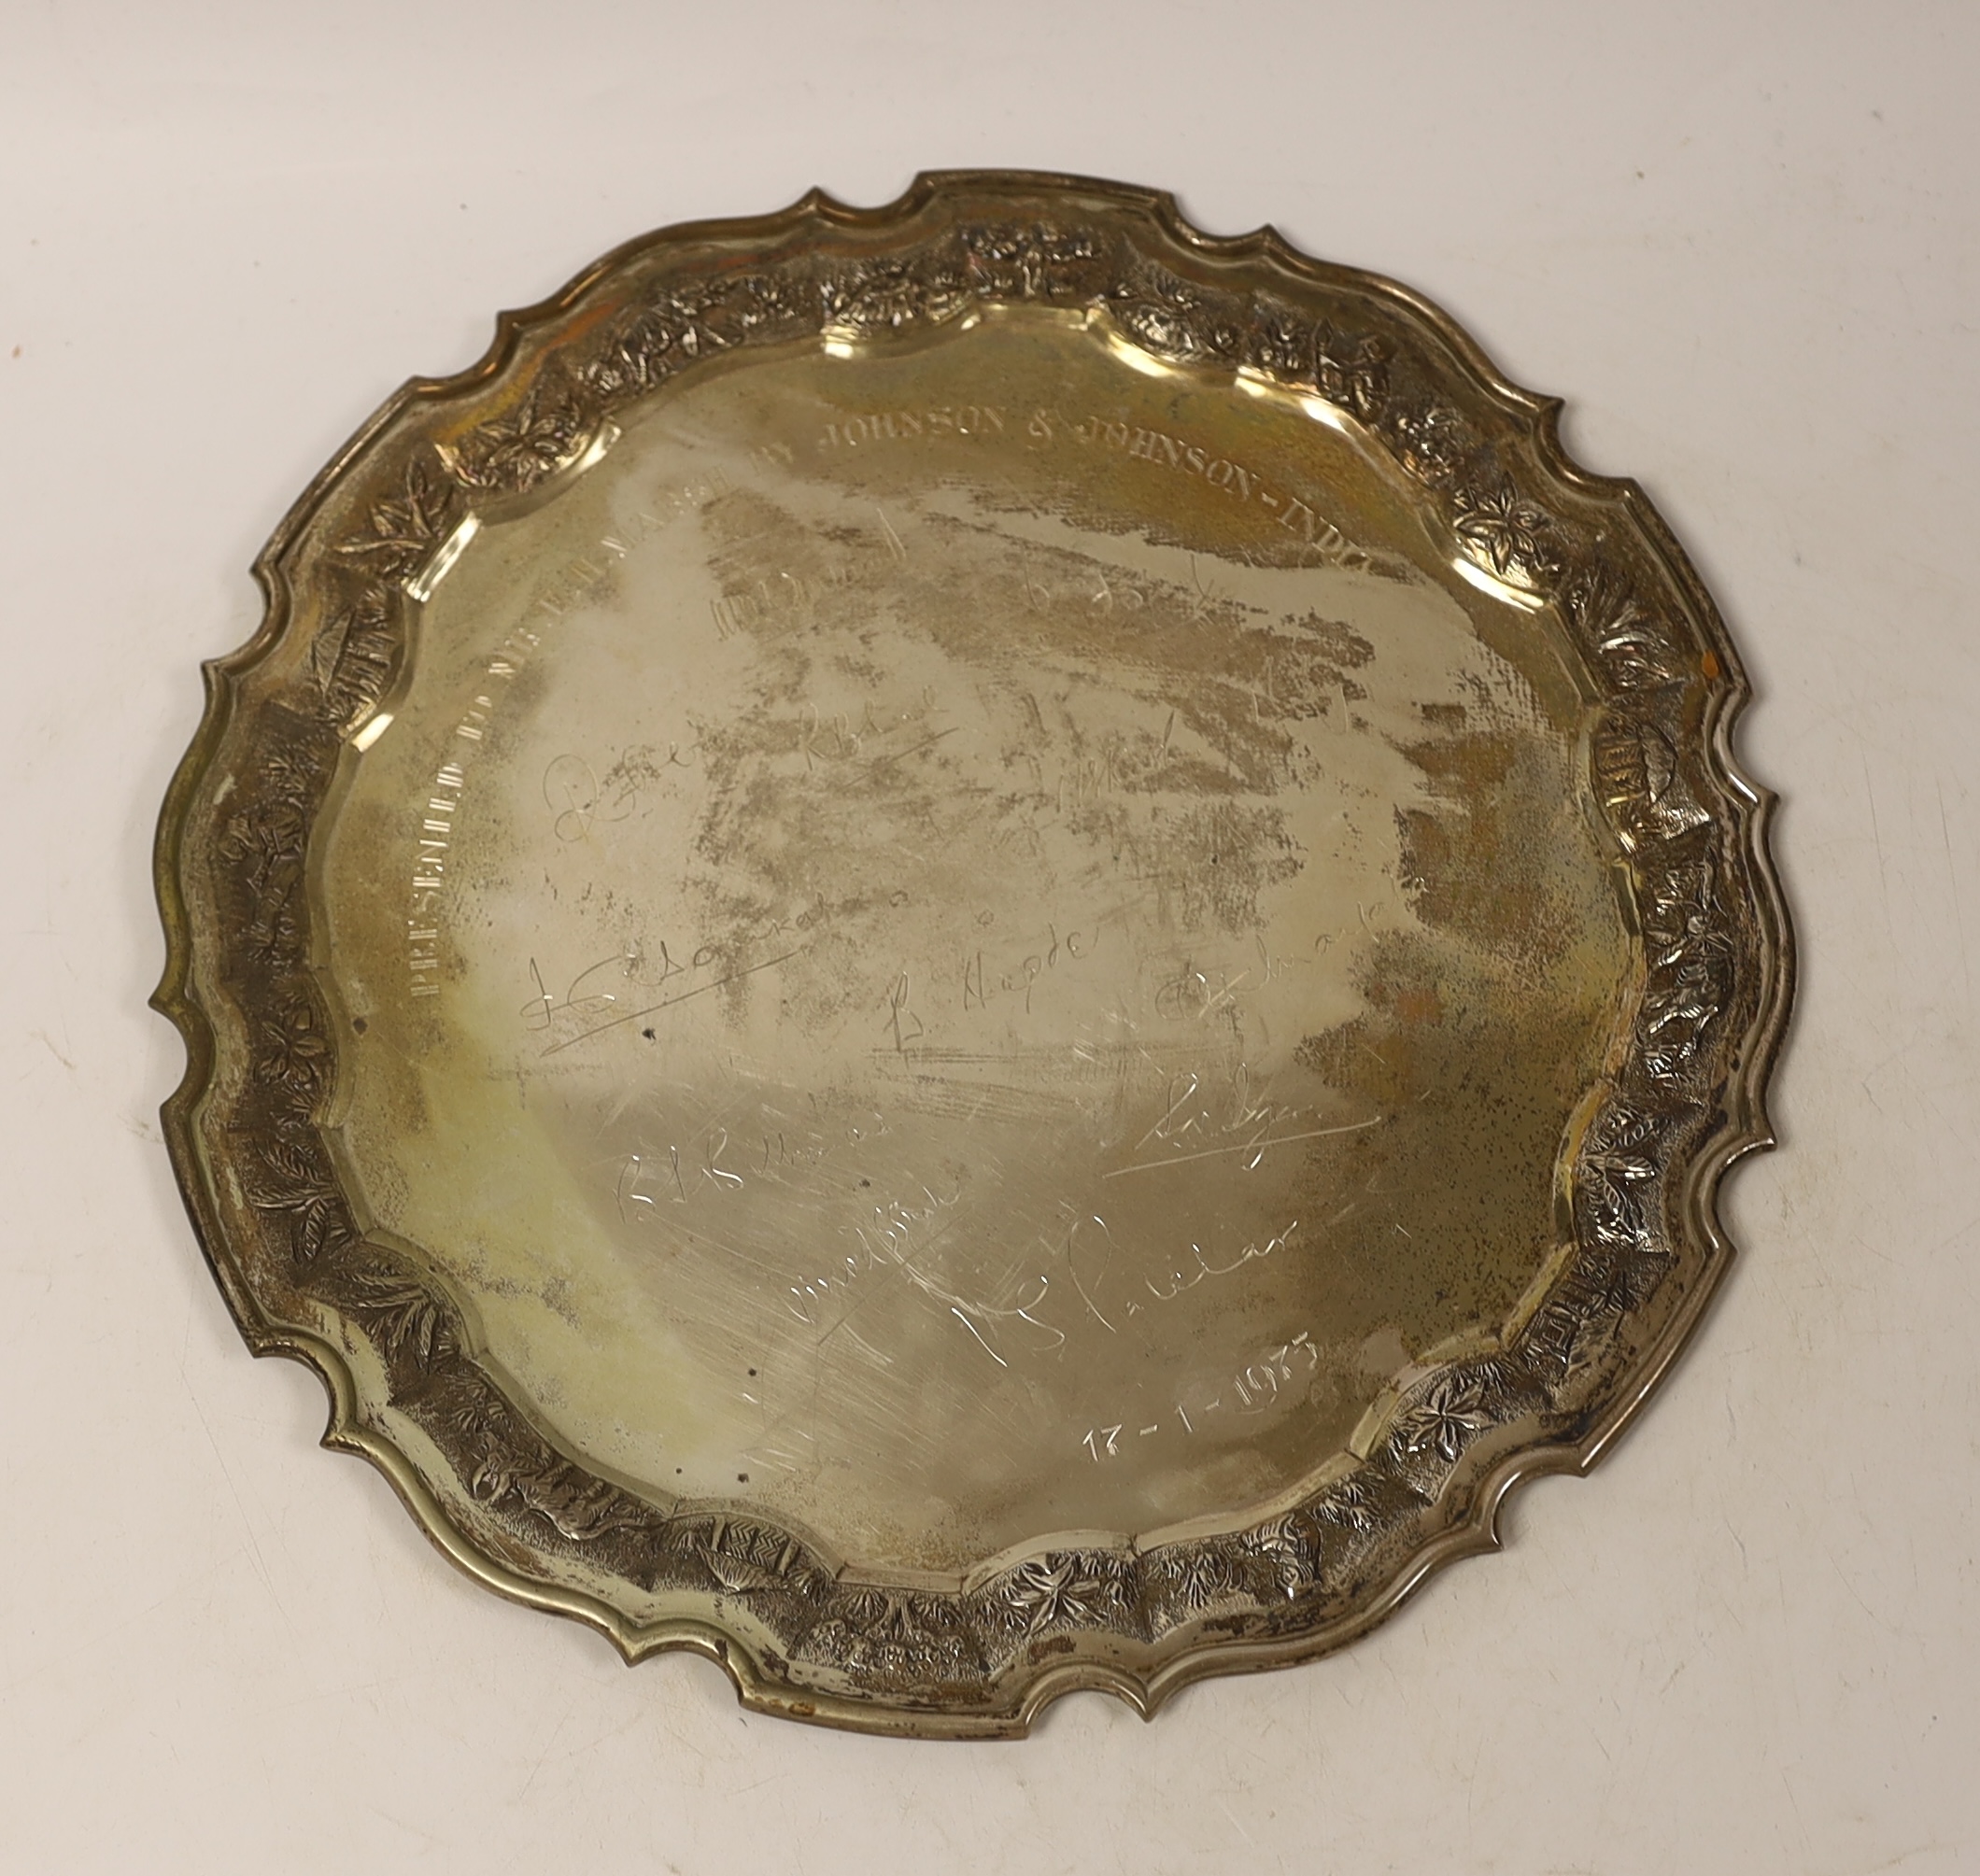 An Indian white metal presentation salver, engraved with signatures, 28.1cm, 19.7oz.